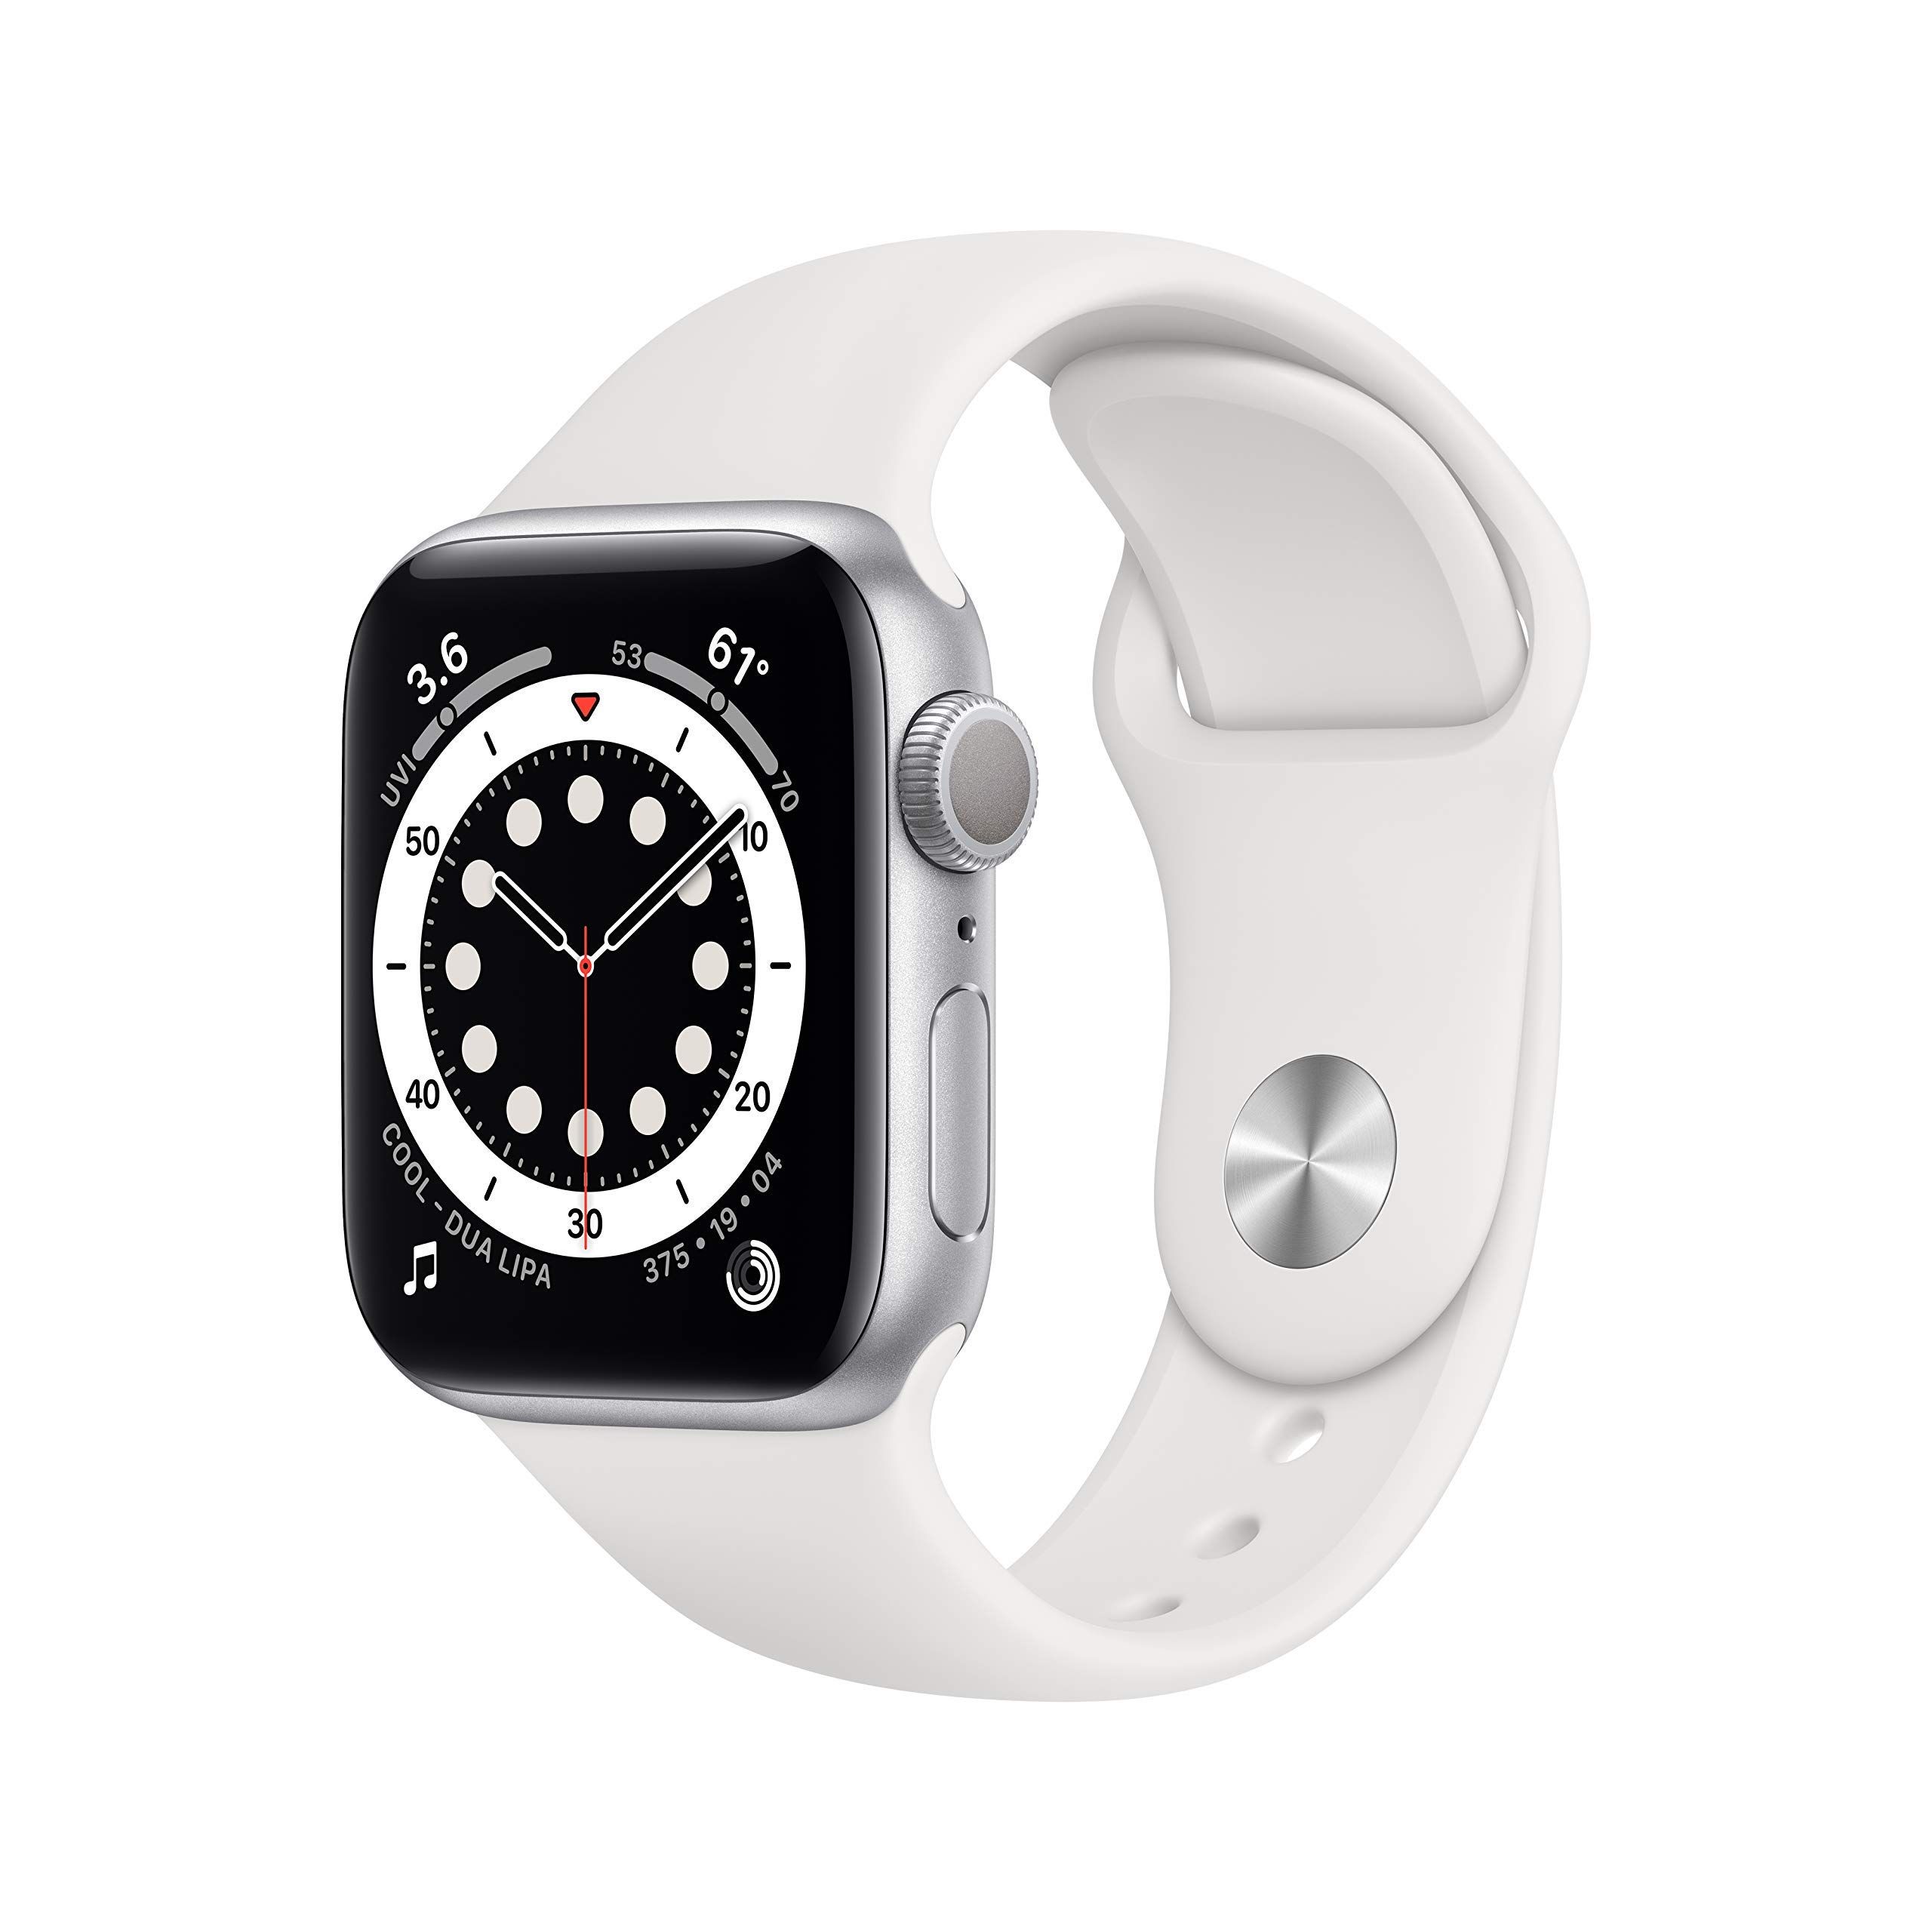 Apple Watch Series 6 (GPS, 40mm) - Silver Aluminum Case with White Sport Band (Renewed) | Amazon (US)